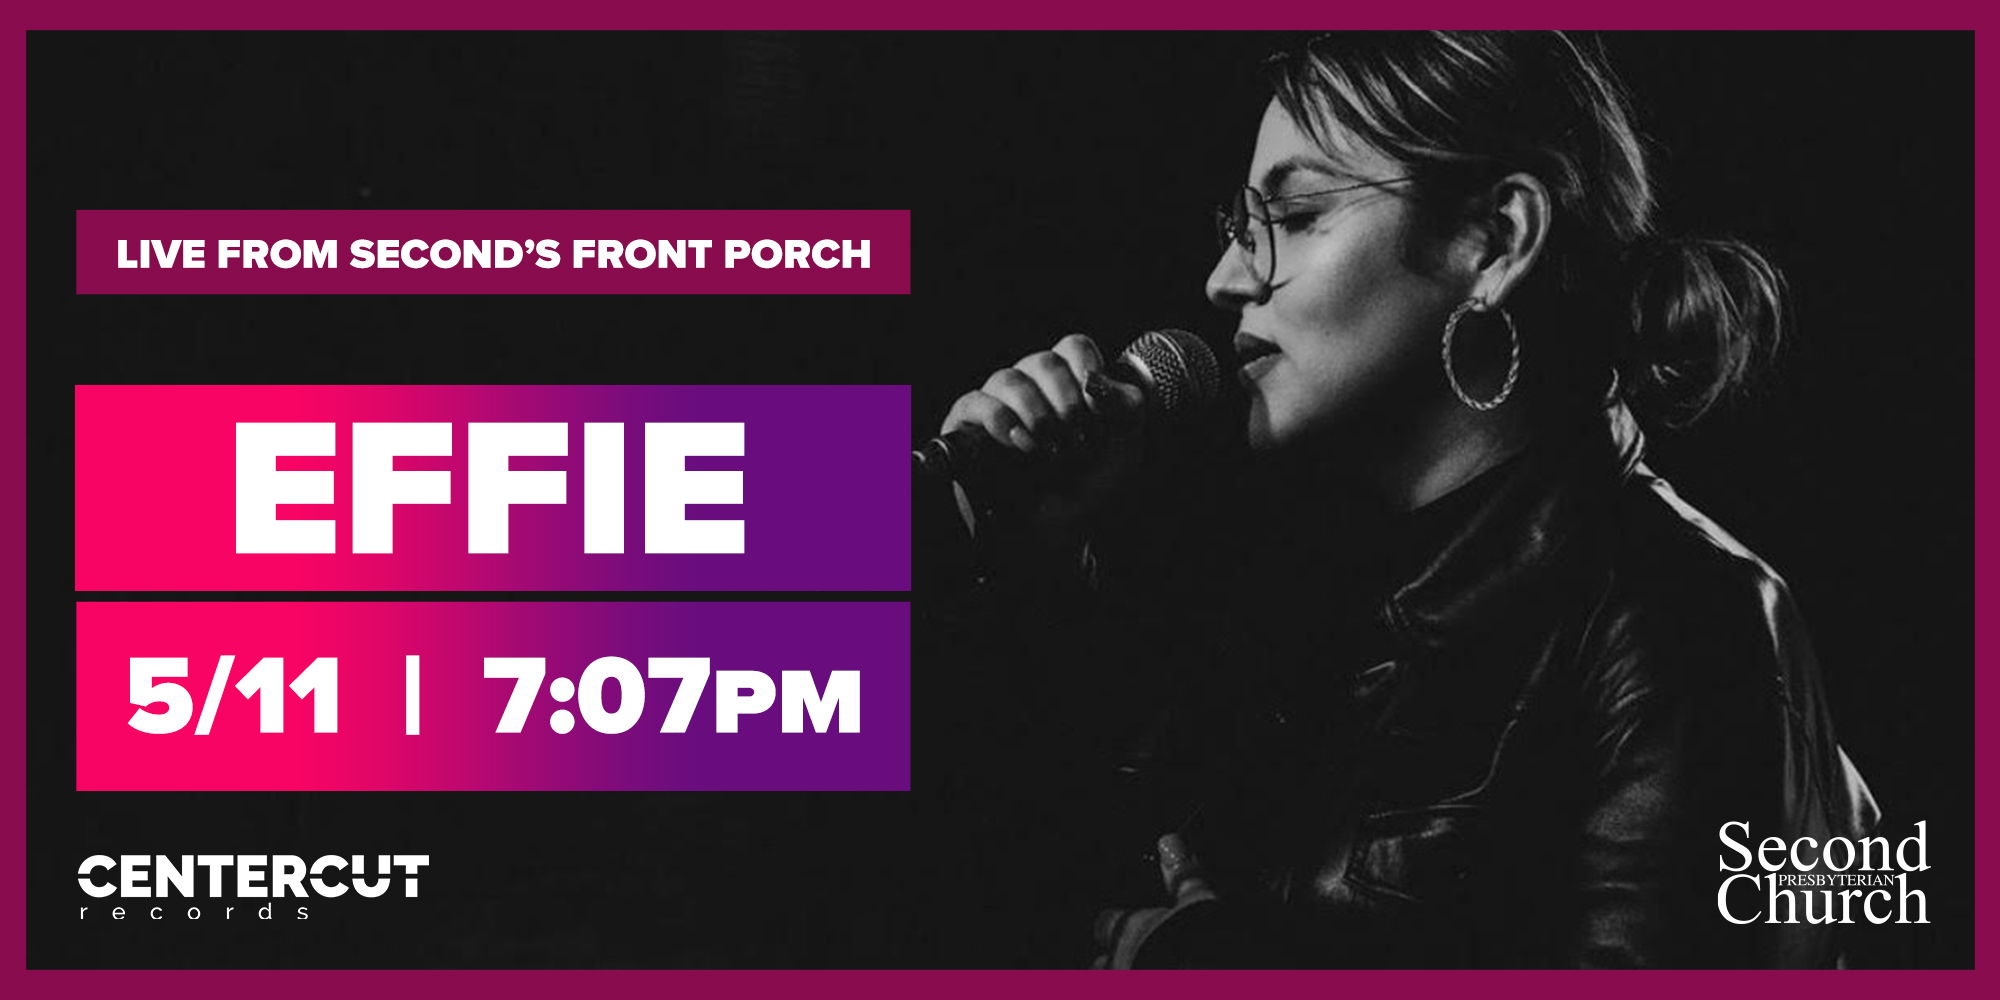 Effie - Front Porch Concert at Second Presbyterian Church promotional image